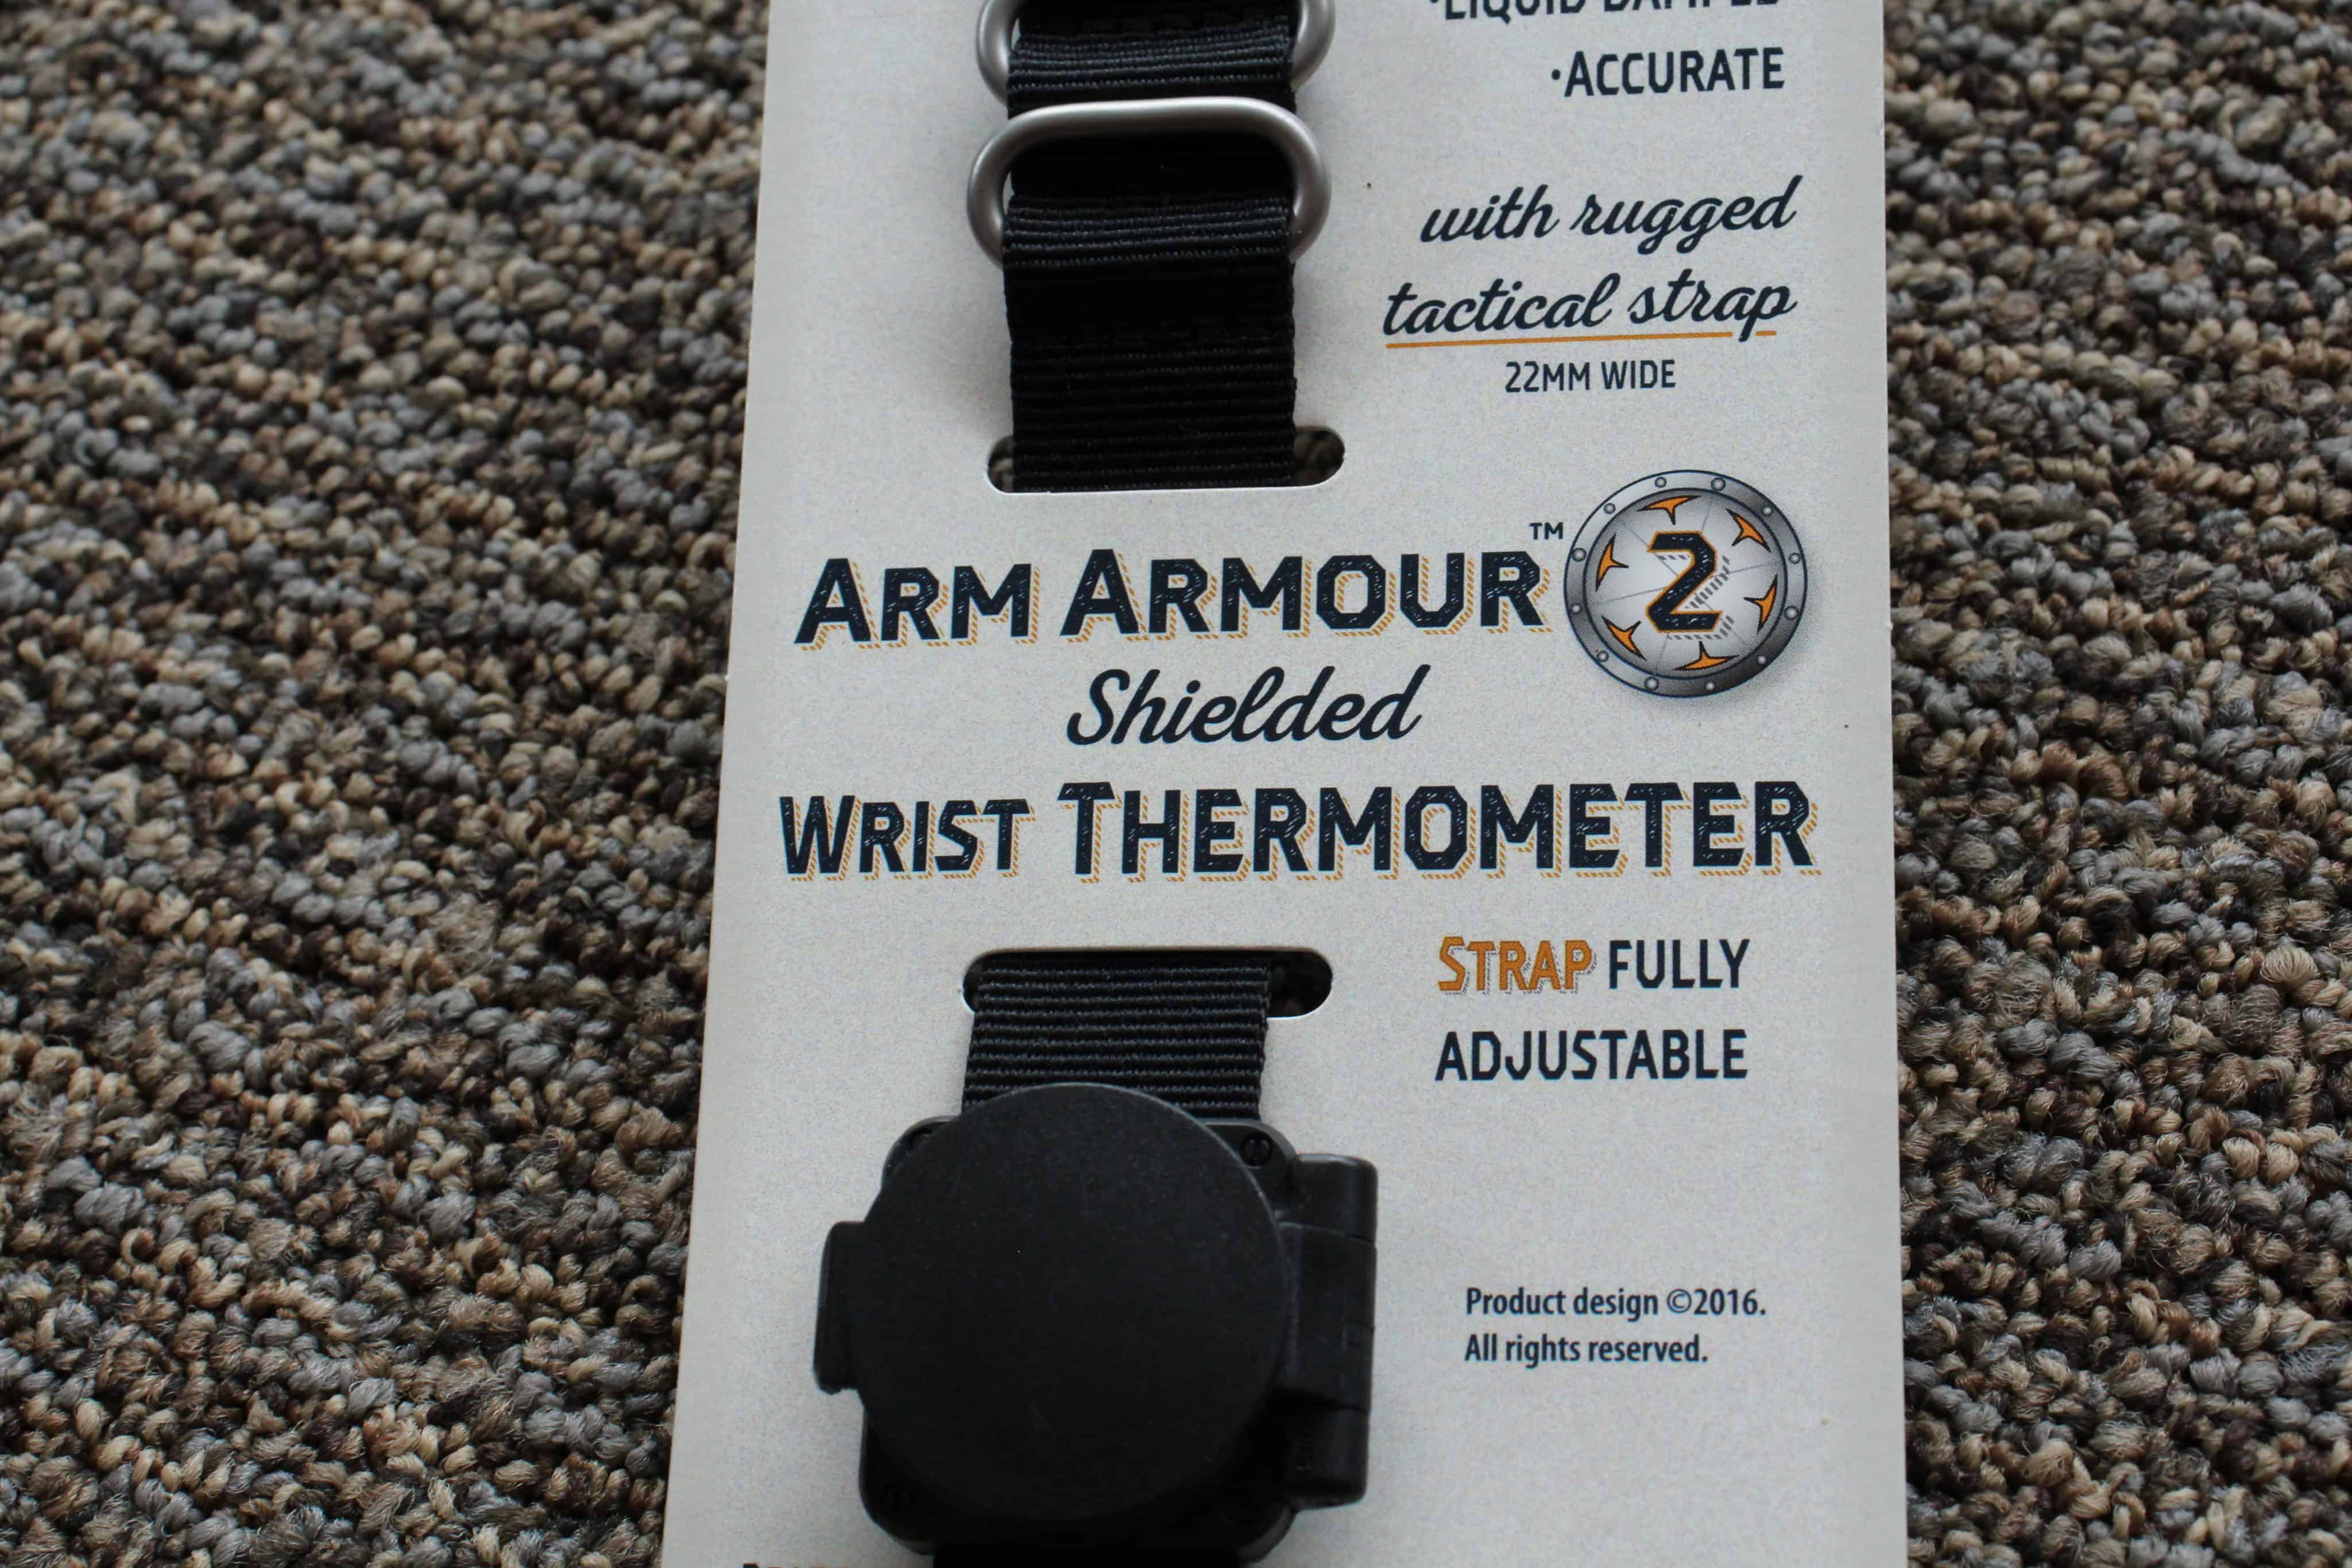 3 Great Products by Sun Company: Altimeter, Compass, and Thermometer 15